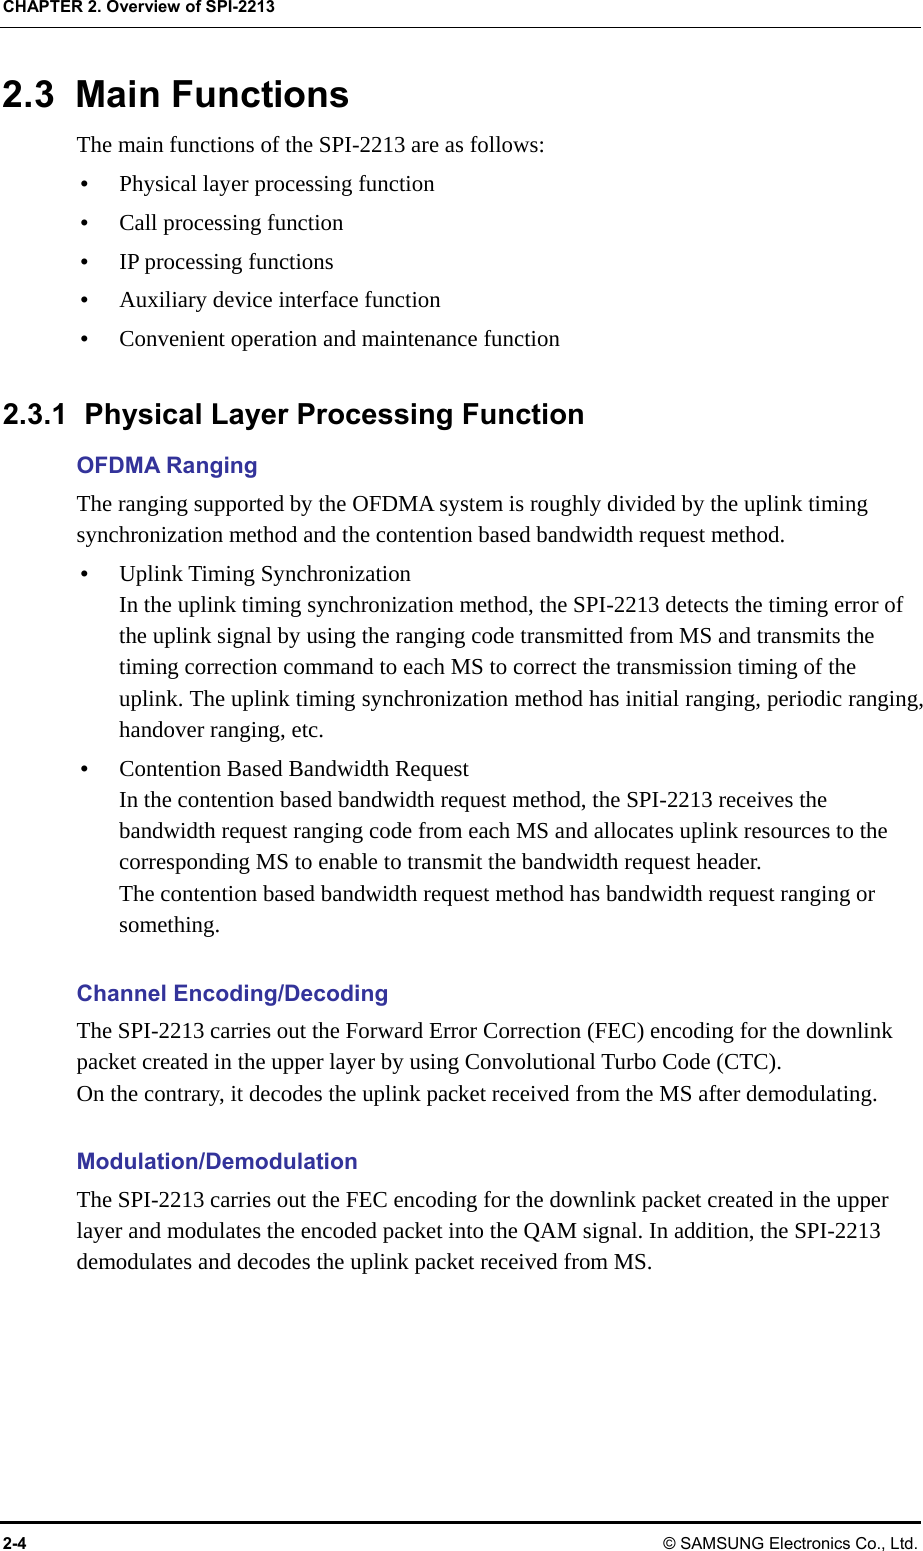 CHAPTER 2. Overview of SPI-2213 2-4 © SAMSUNG Electronics Co., Ltd. 2.3 Main Functions The main functions of the SPI-2213 are as follows: y Physical layer processing function y Call processing function y IP processing functions y Auxiliary device interface function y Convenient operation and maintenance function  2.3.1  Physical Layer Processing Function OFDMA Ranging The ranging supported by the OFDMA system is roughly divided by the uplink timing synchronization method and the contention based bandwidth request method. y Uplink Timing Synchronization In the uplink timing synchronization method, the SPI-2213 detects the timing error of the uplink signal by using the ranging code transmitted from MS and transmits the timing correction command to each MS to correct the transmission timing of the uplink. The uplink timing synchronization method has initial ranging, periodic ranging, handover ranging, etc. y Contention Based Bandwidth Request In the contention based bandwidth request method, the SPI-2213 receives the bandwidth request ranging code from each MS and allocates uplink resources to the corresponding MS to enable to transmit the bandwidth request header. The contention based bandwidth request method has bandwidth request ranging or something.  Channel Encoding/Decoding The SPI-2213 carries out the Forward Error Correction (FEC) encoding for the downlink packet created in the upper layer by using Convolutional Turbo Code (CTC).   On the contrary, it decodes the uplink packet received from the MS after demodulating.  Modulation/Demodulation The SPI-2213 carries out the FEC encoding for the downlink packet created in the upper layer and modulates the encoded packet into the QAM signal. In addition, the SPI-2213 demodulates and decodes the uplink packet received from MS.  